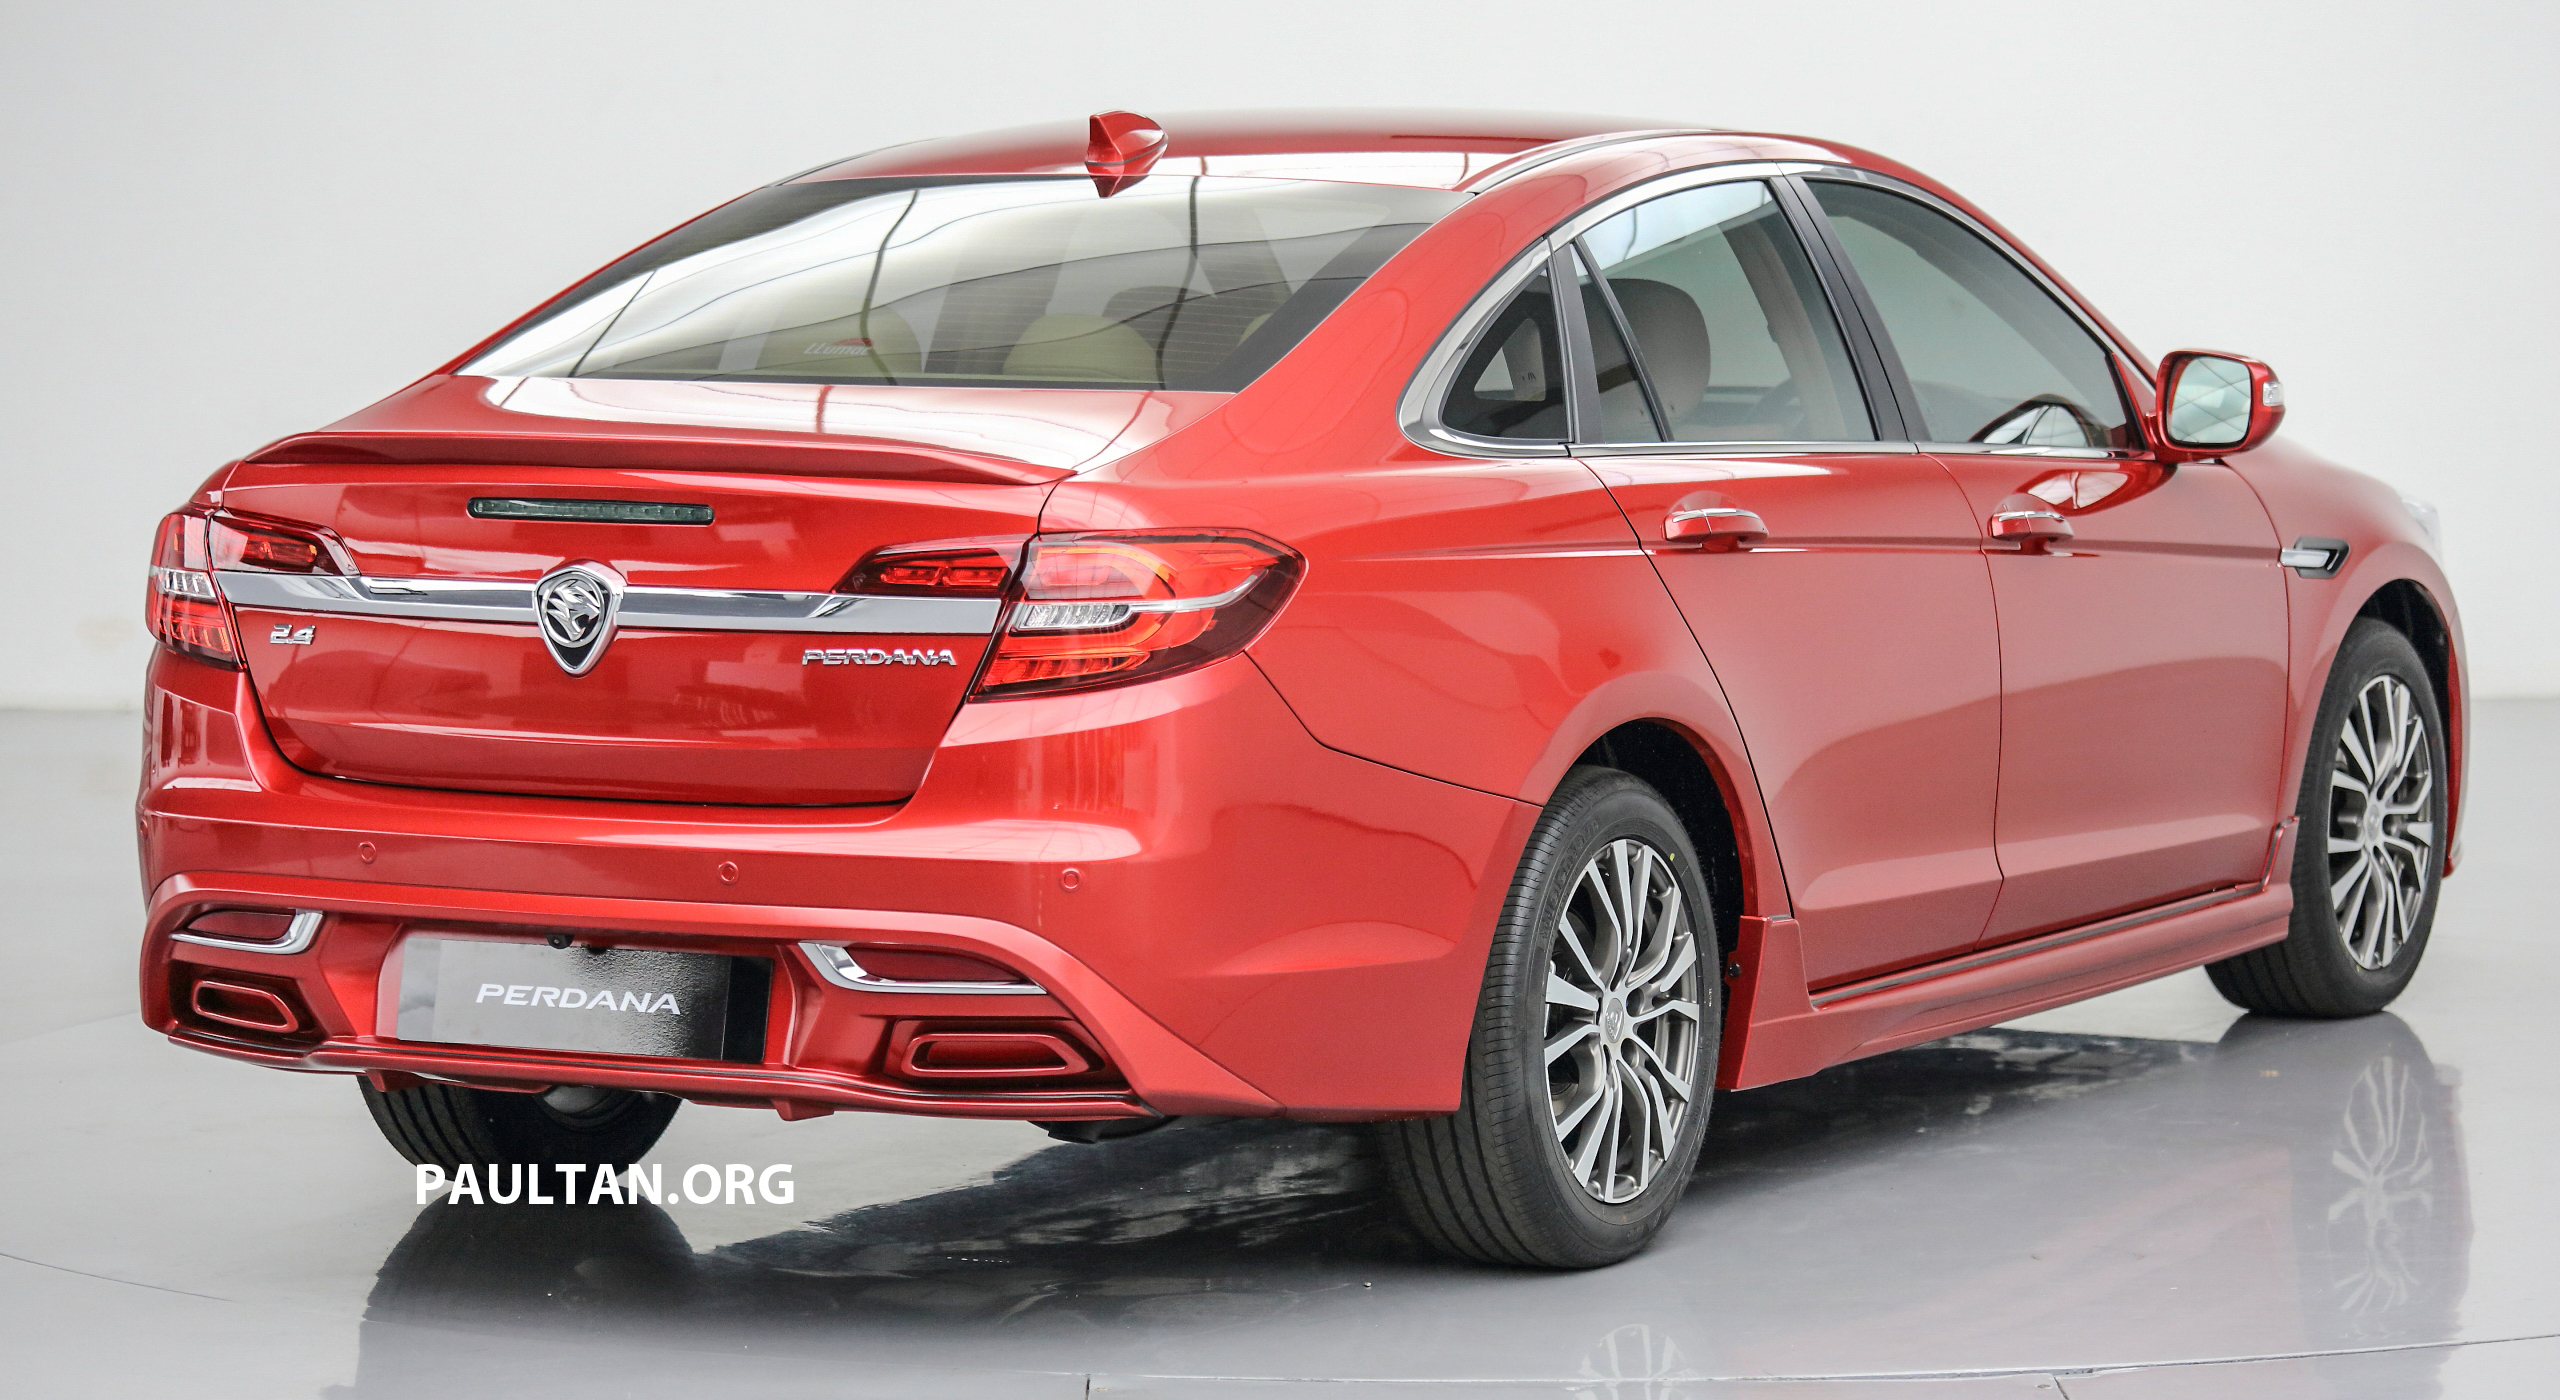 New Proton Perdana limited to 7,000 units annually exports permitted